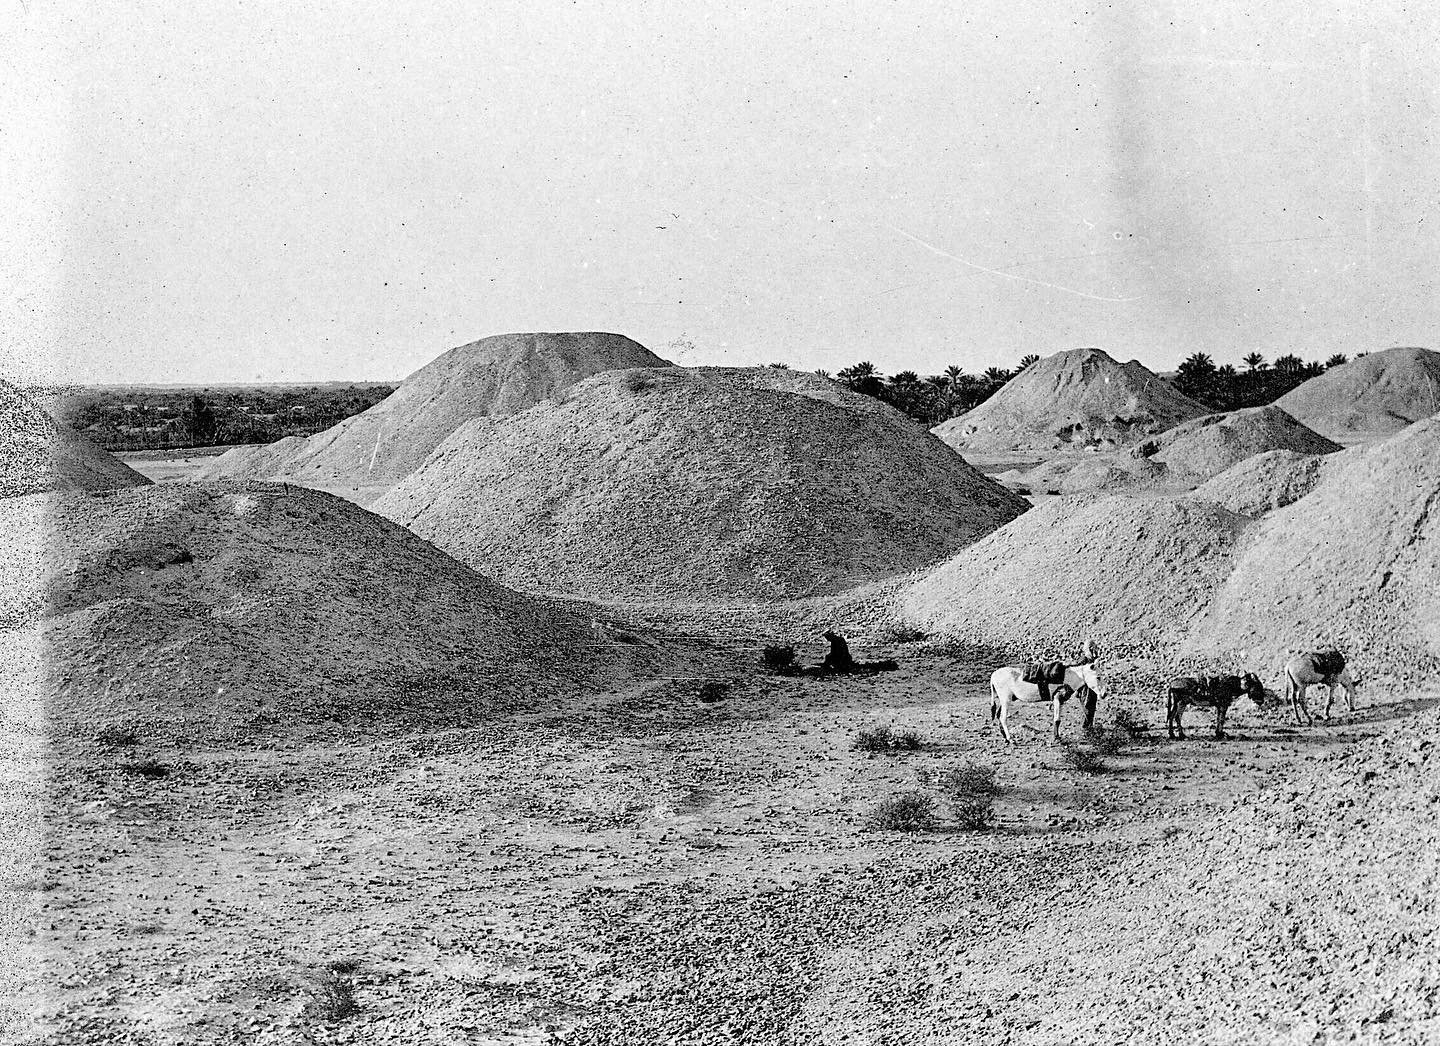 When @aikarimi mentioned the Dilmum Burial Mounds in Bahrain on a recent episode of the afikra podcast with Civil Arhitecture, we were intrigued to learn more about them. 

The Dilmun Burial Mounds were built between 2200 and 1750 BCE, spanning over 